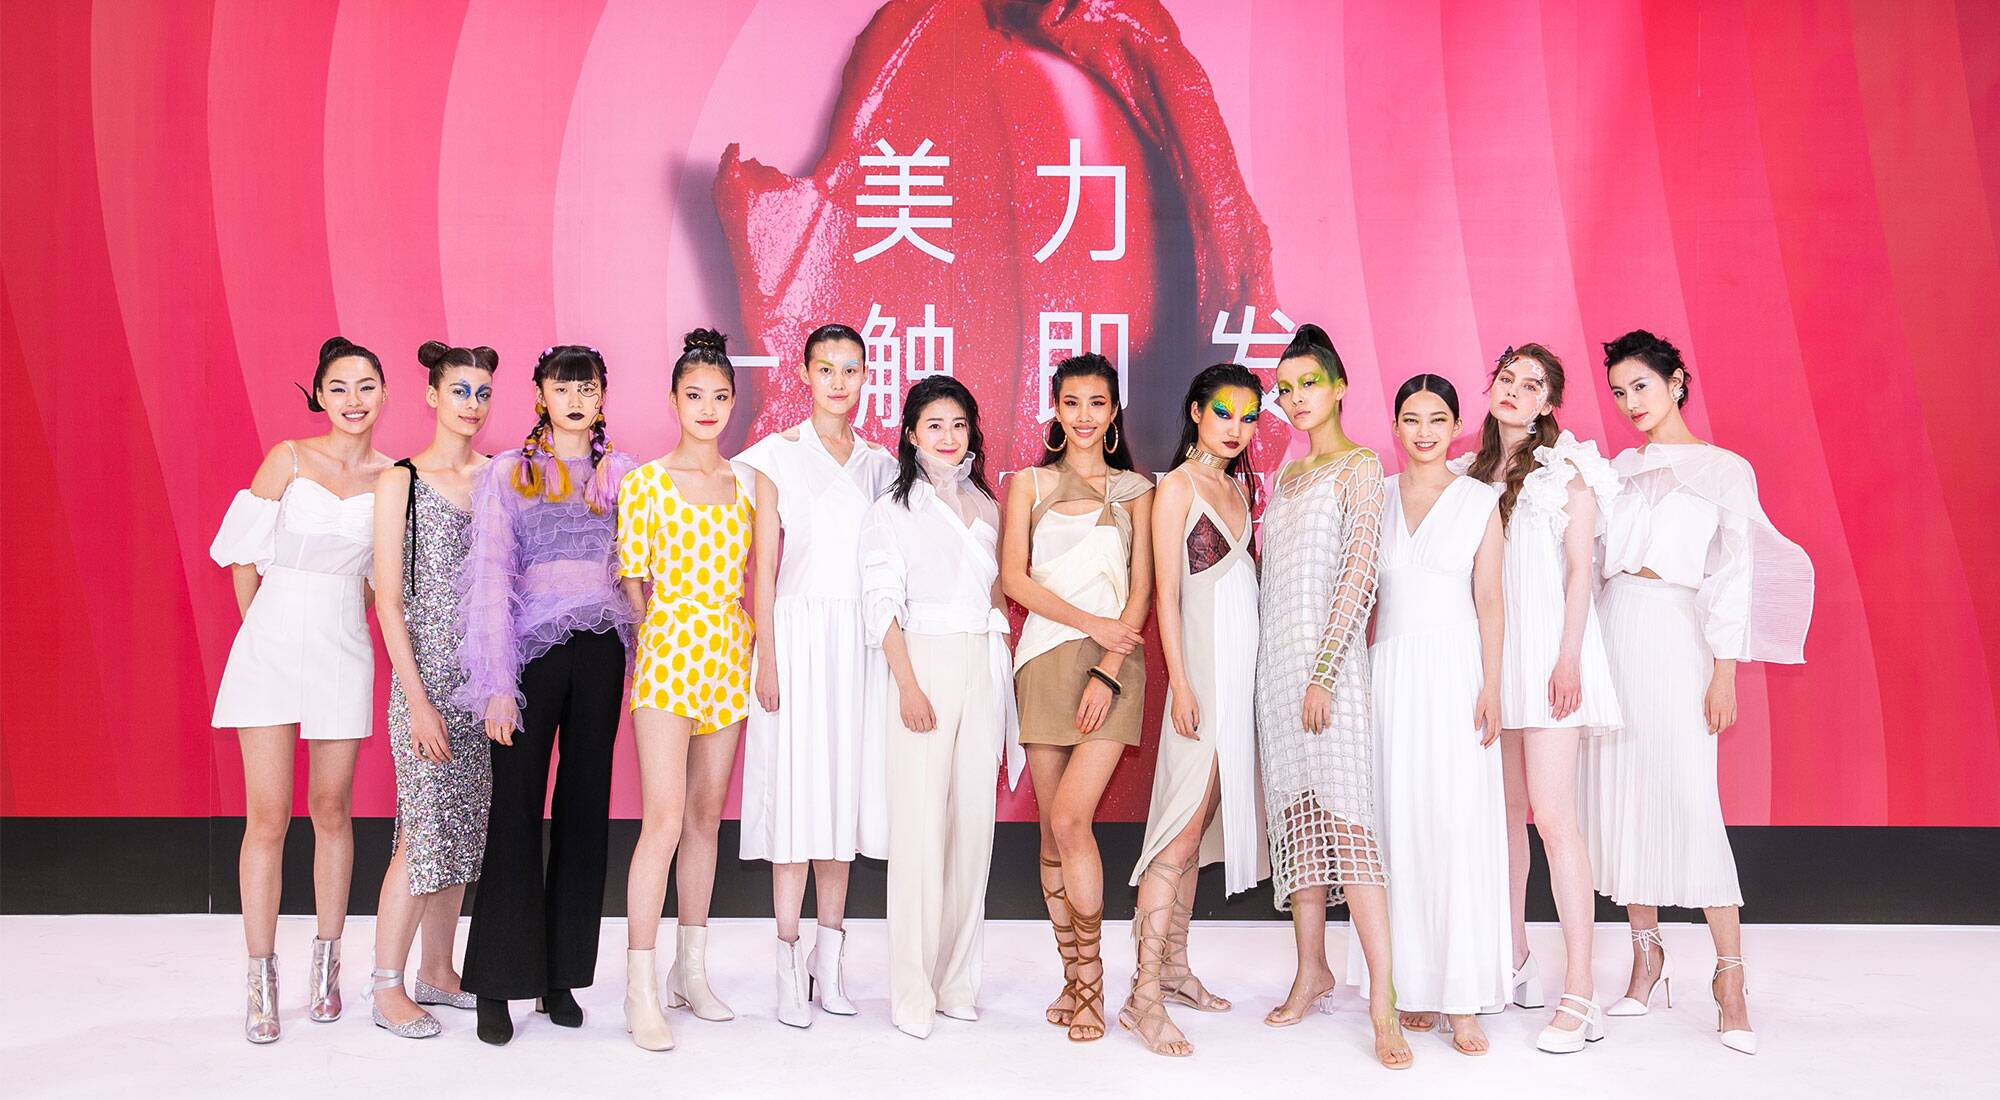 Sephora China unveils 2020 beauty trends during Virtual Sephora Day - LVMH